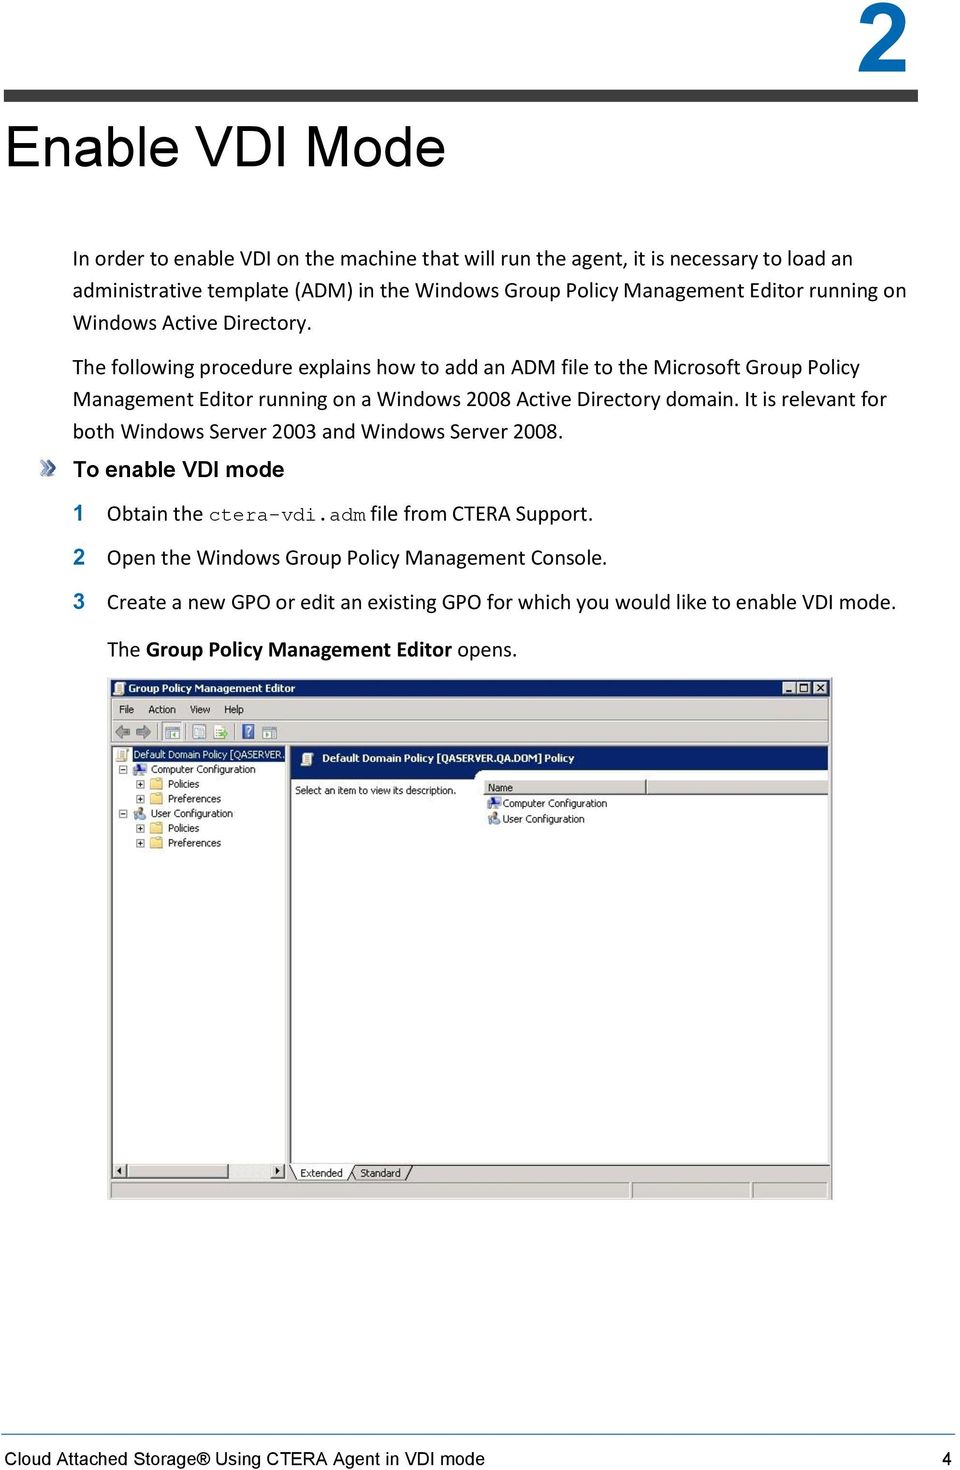 The following procedure explains how to add an ADM file to the Microsoft Group Policy Management Editor running on a Windows 2008 Active Directory domain.